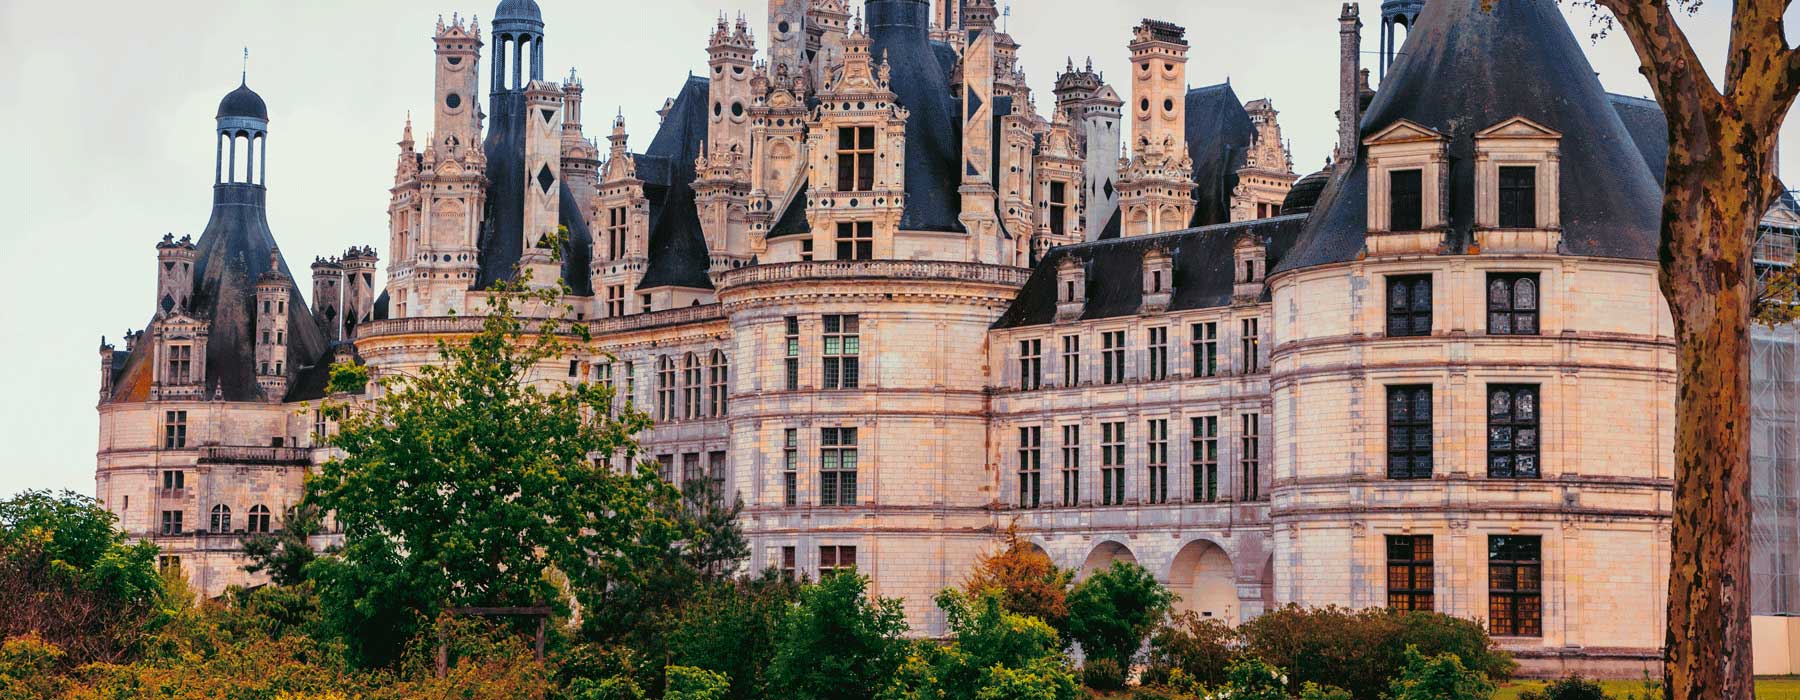  Central France & Loire Valley holidays